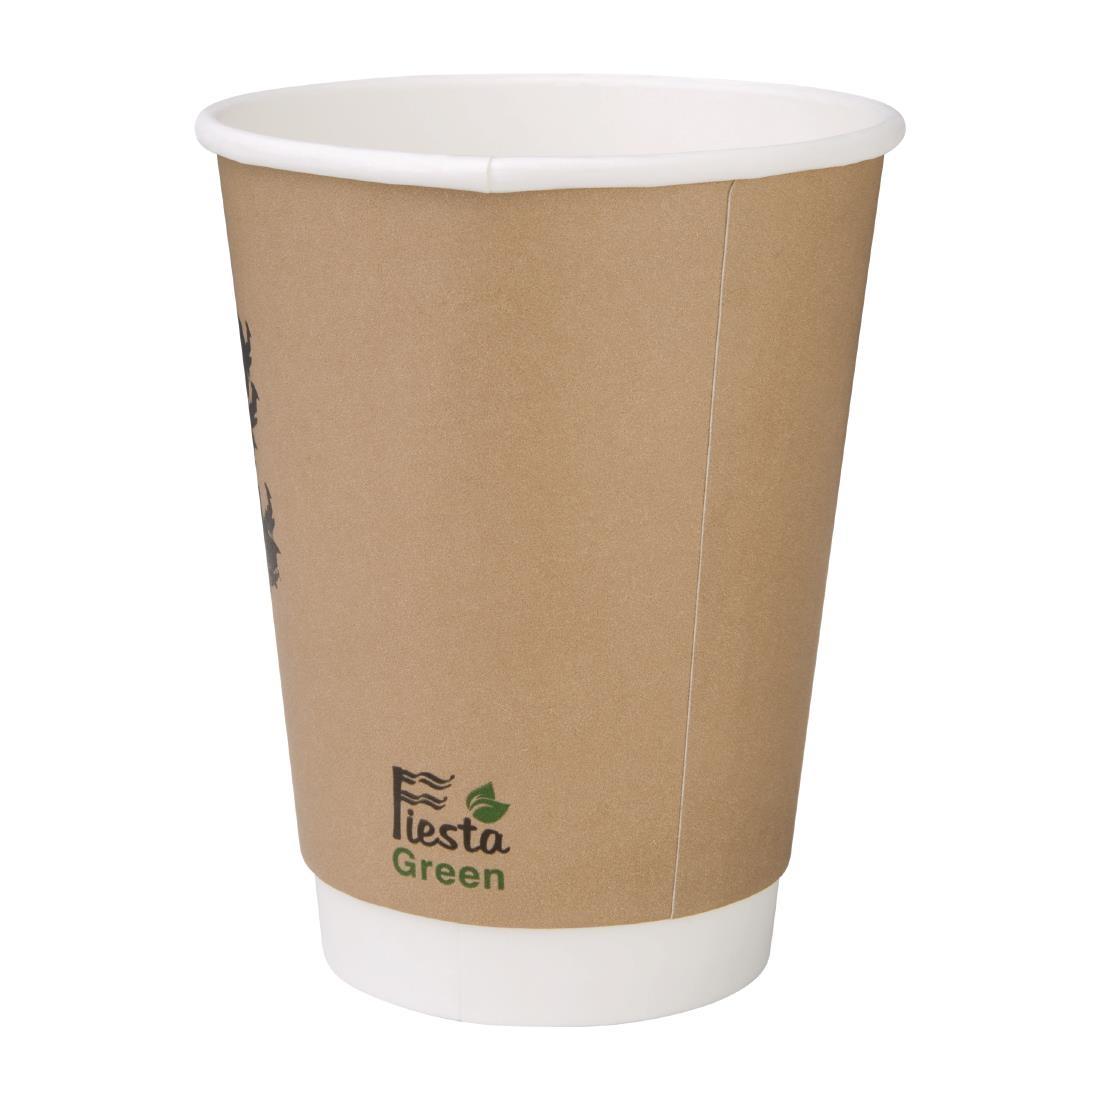 Fiesta Compostable Coffee Cups Double Wall 355ml / 12oz (Pack of 500) - DY987  - 2